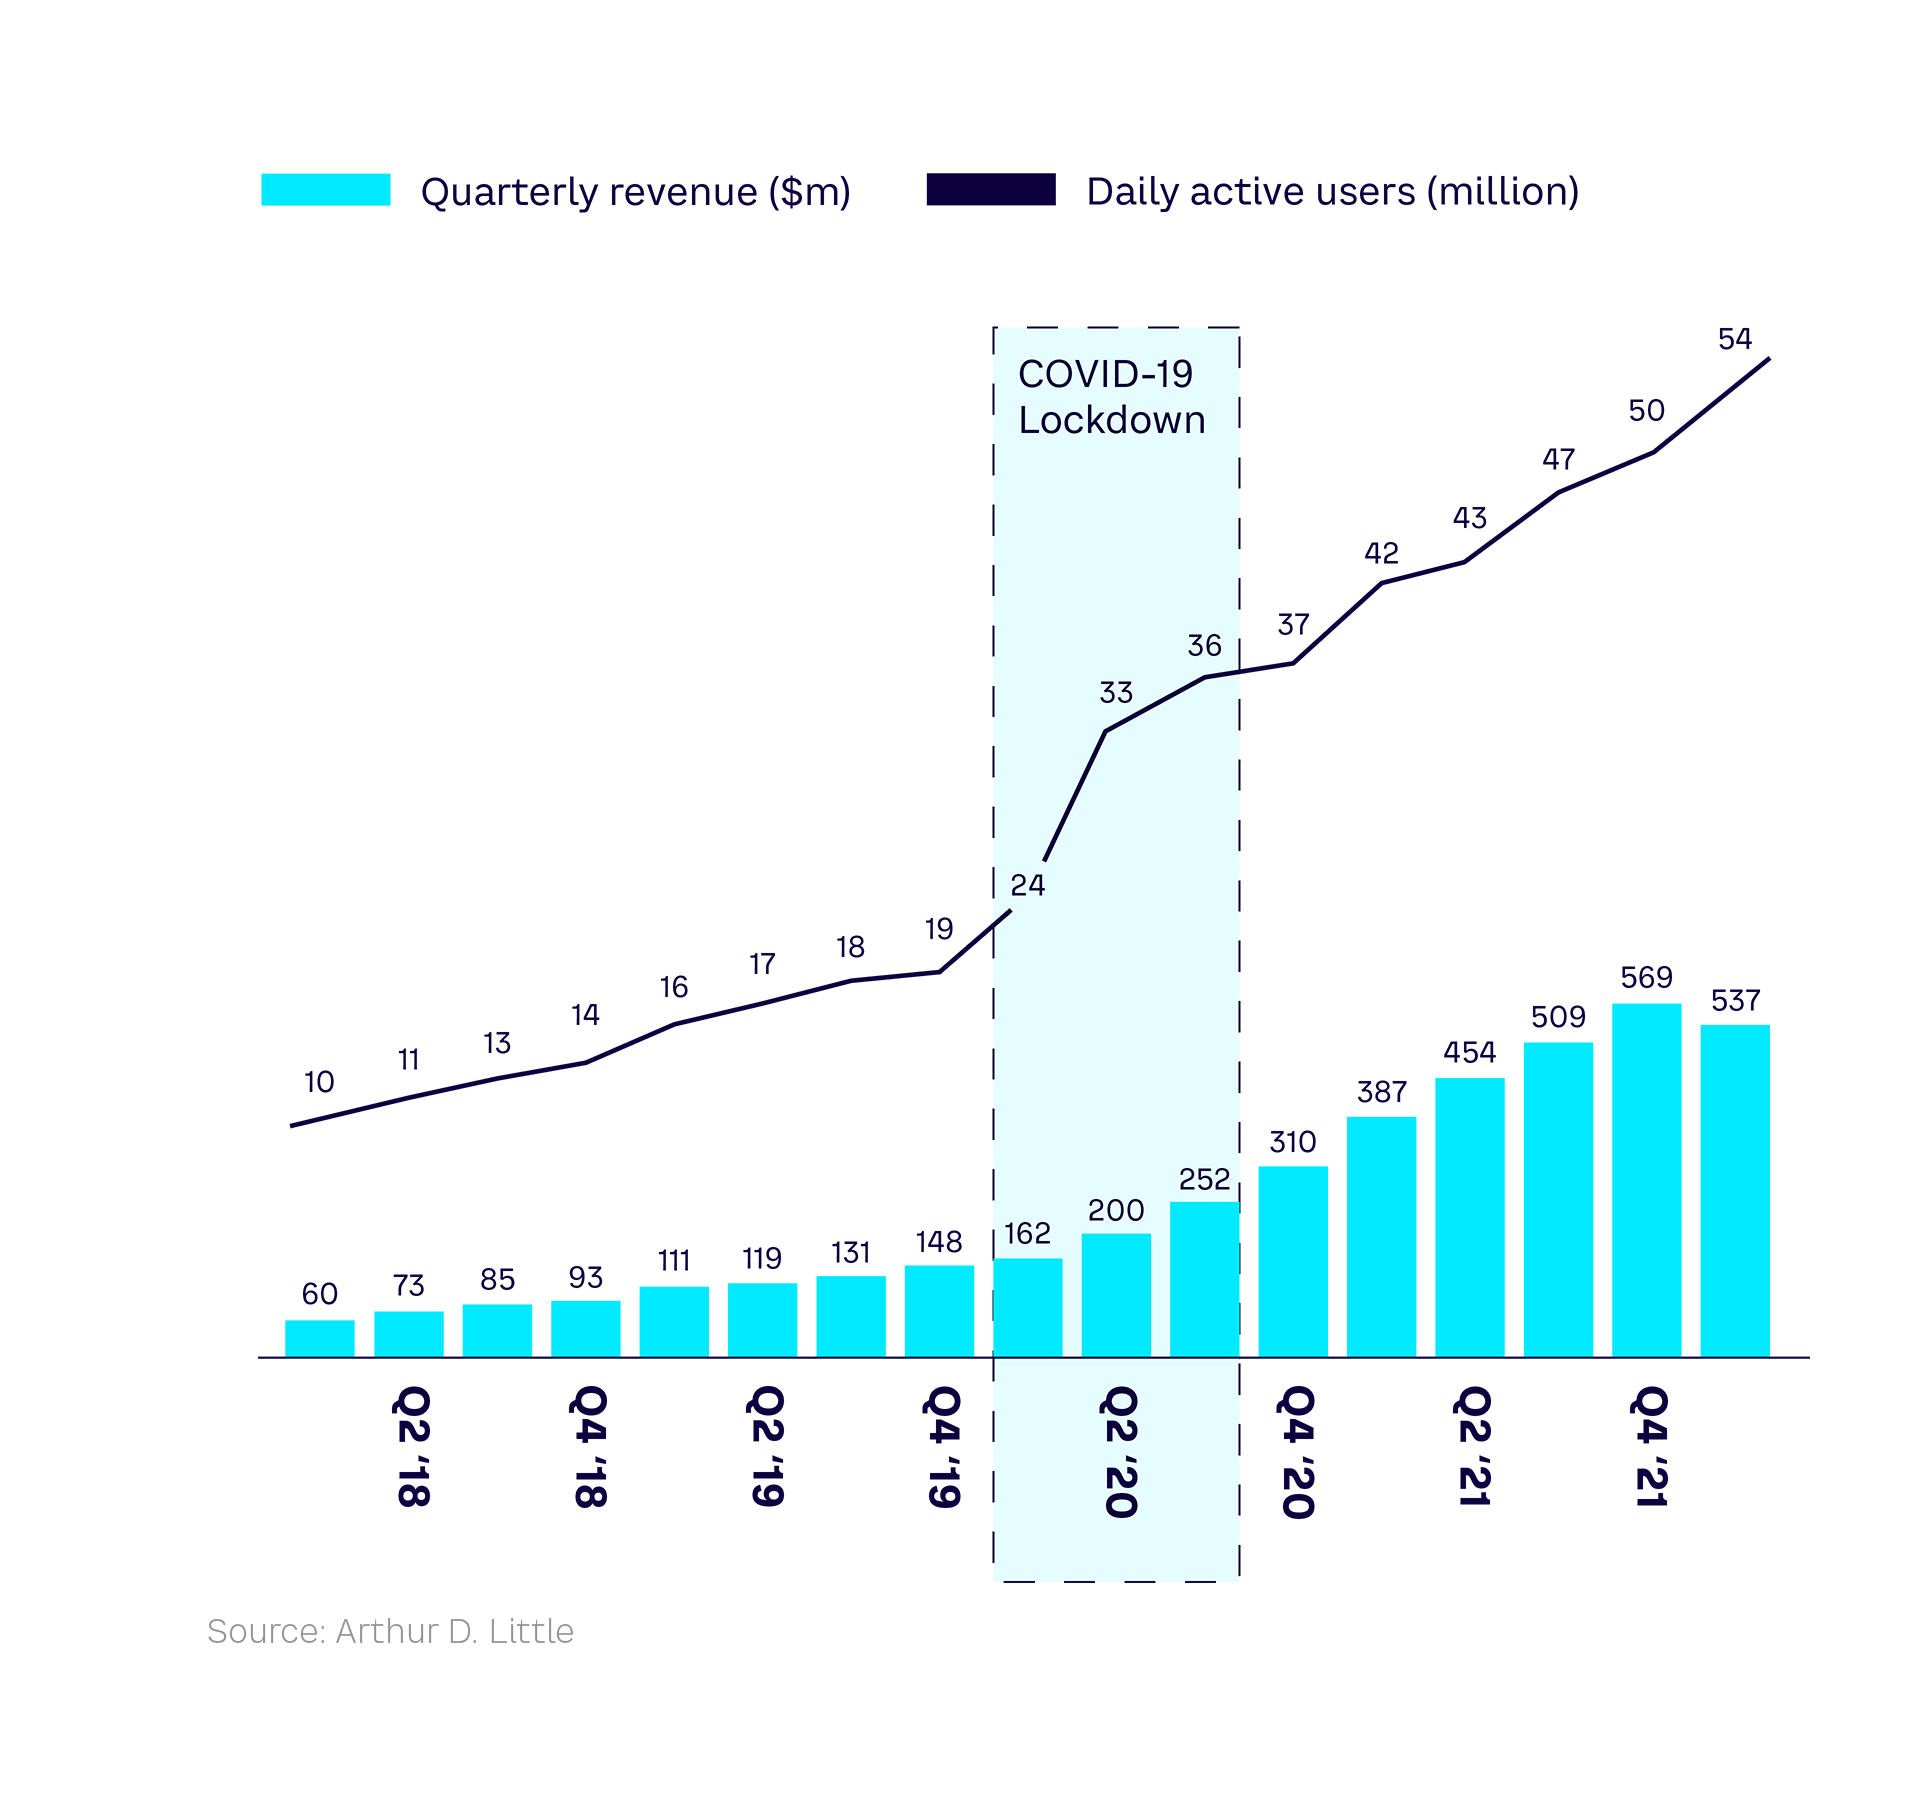 Fig 8 — Revenue generated by Roblox worldwide and daily active users